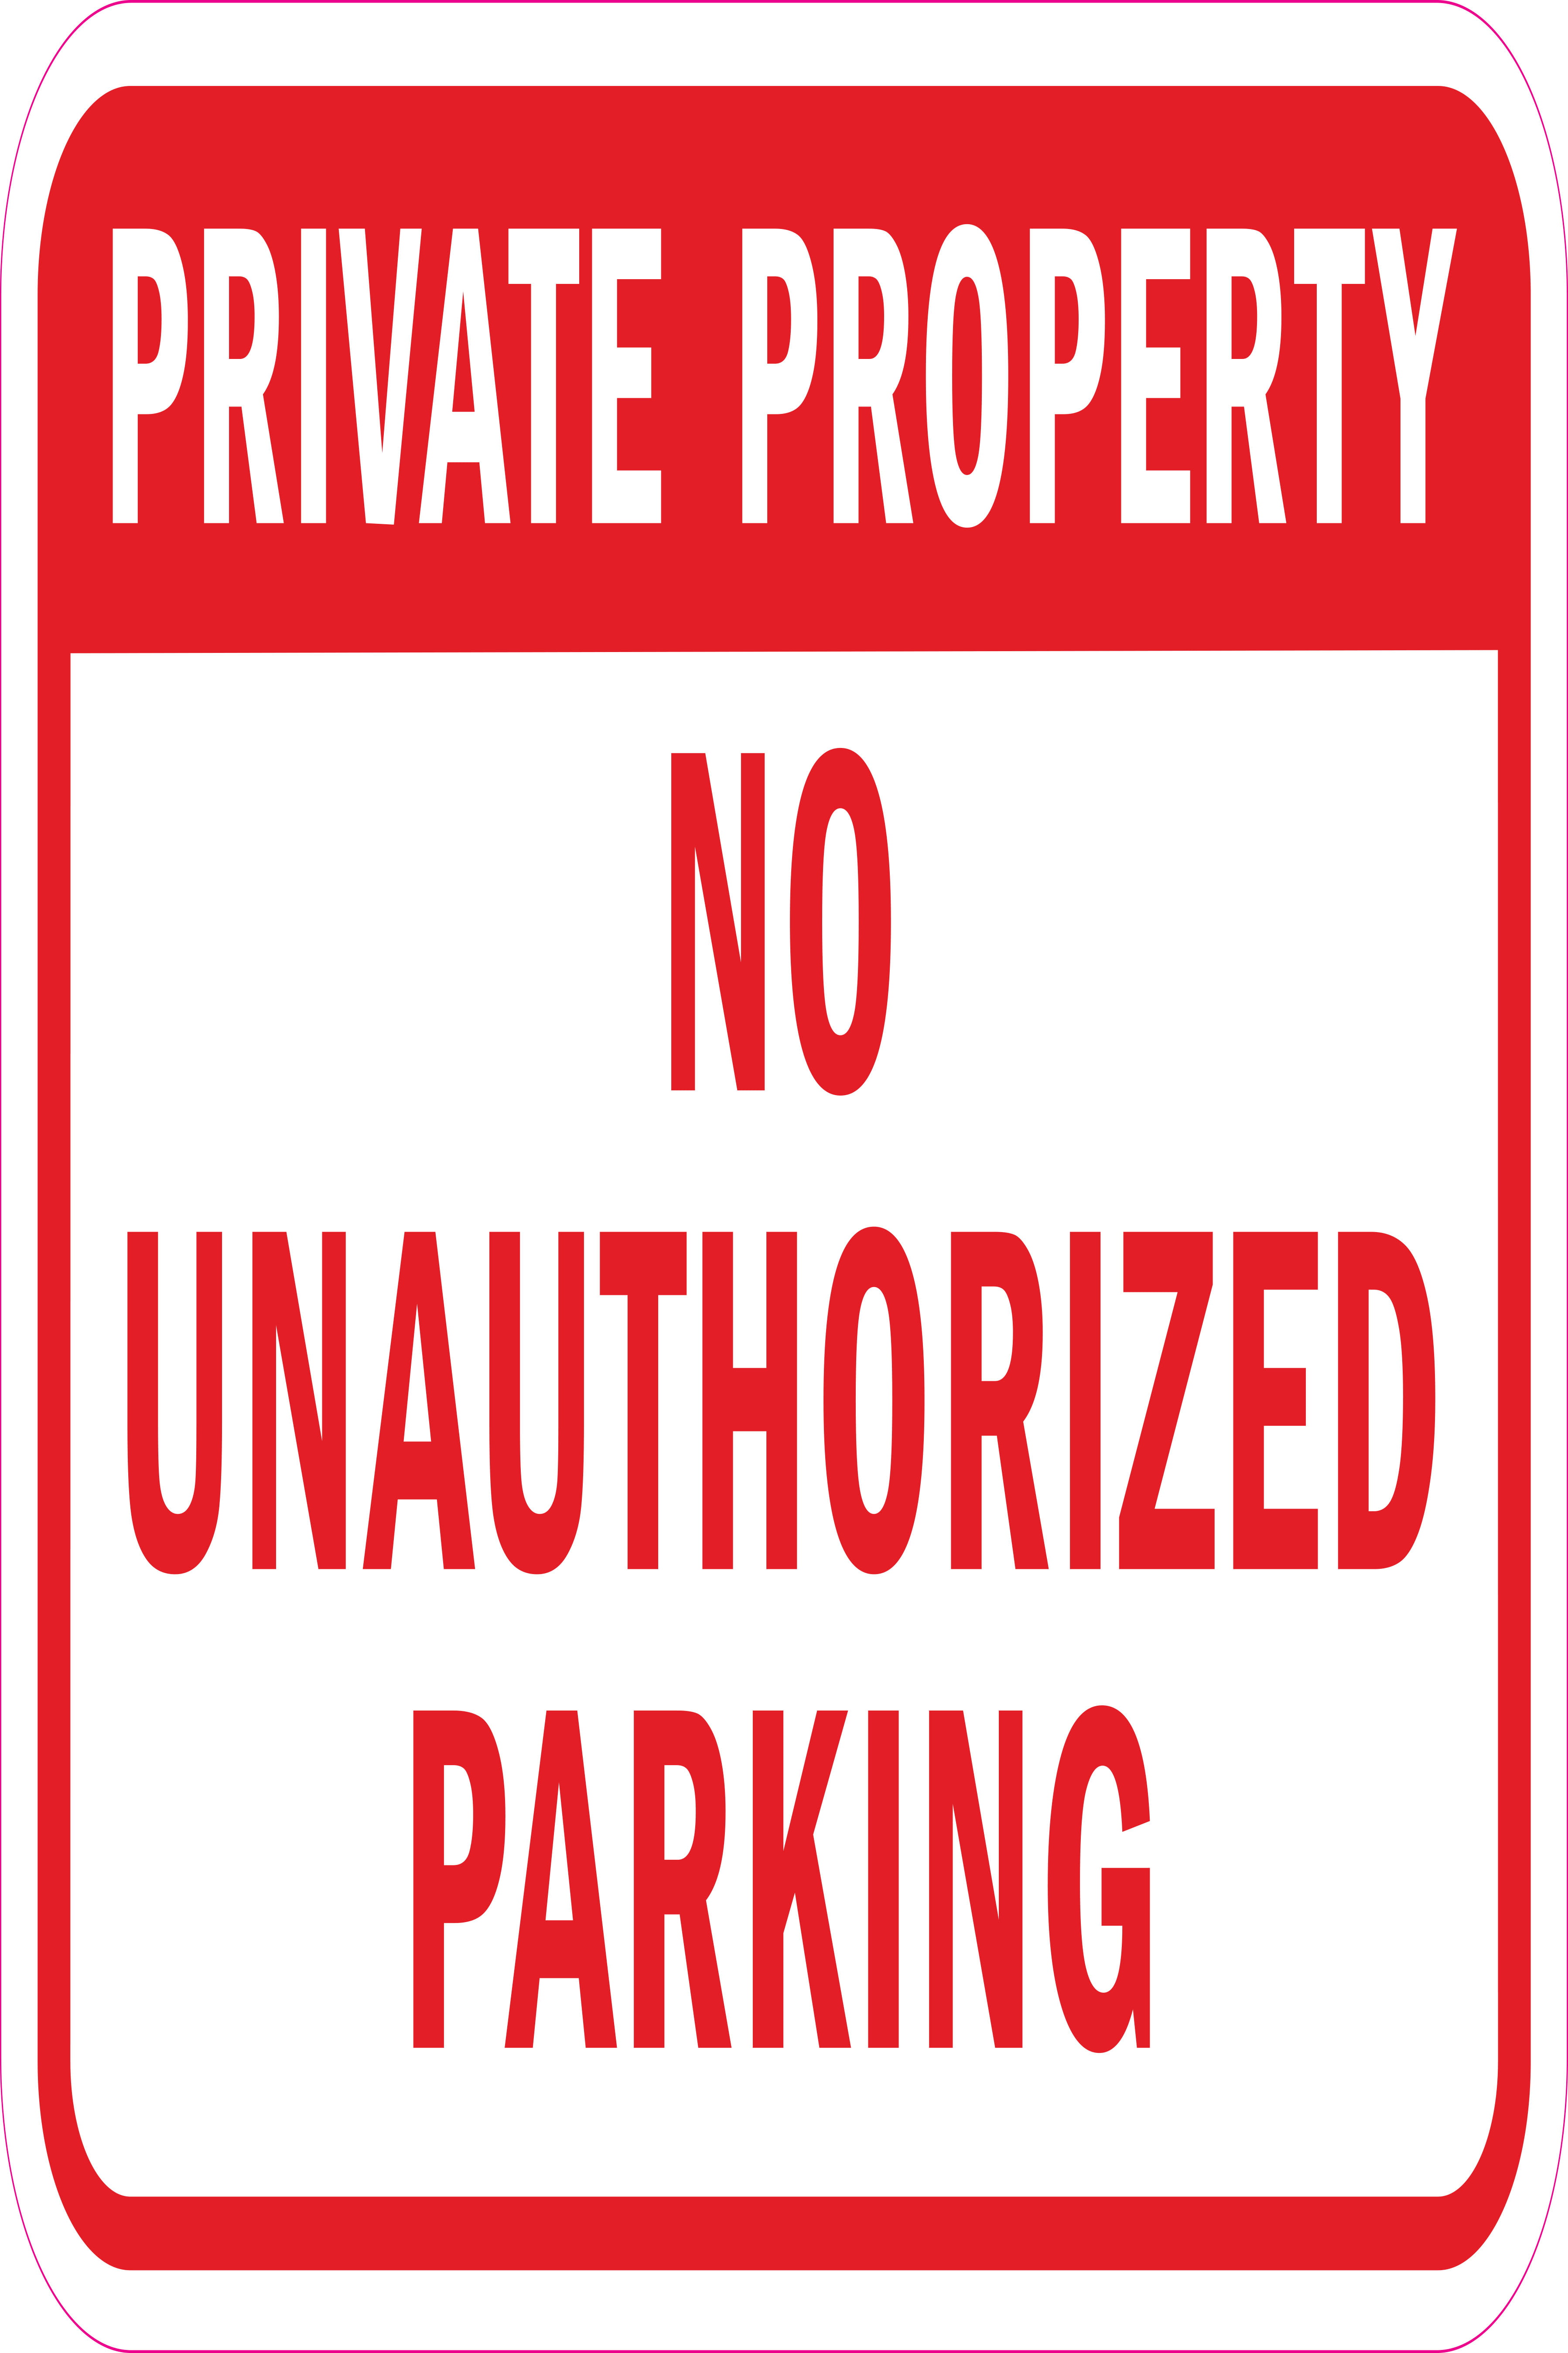 Private Property No Unauthorized Parking Sign 12" x 18